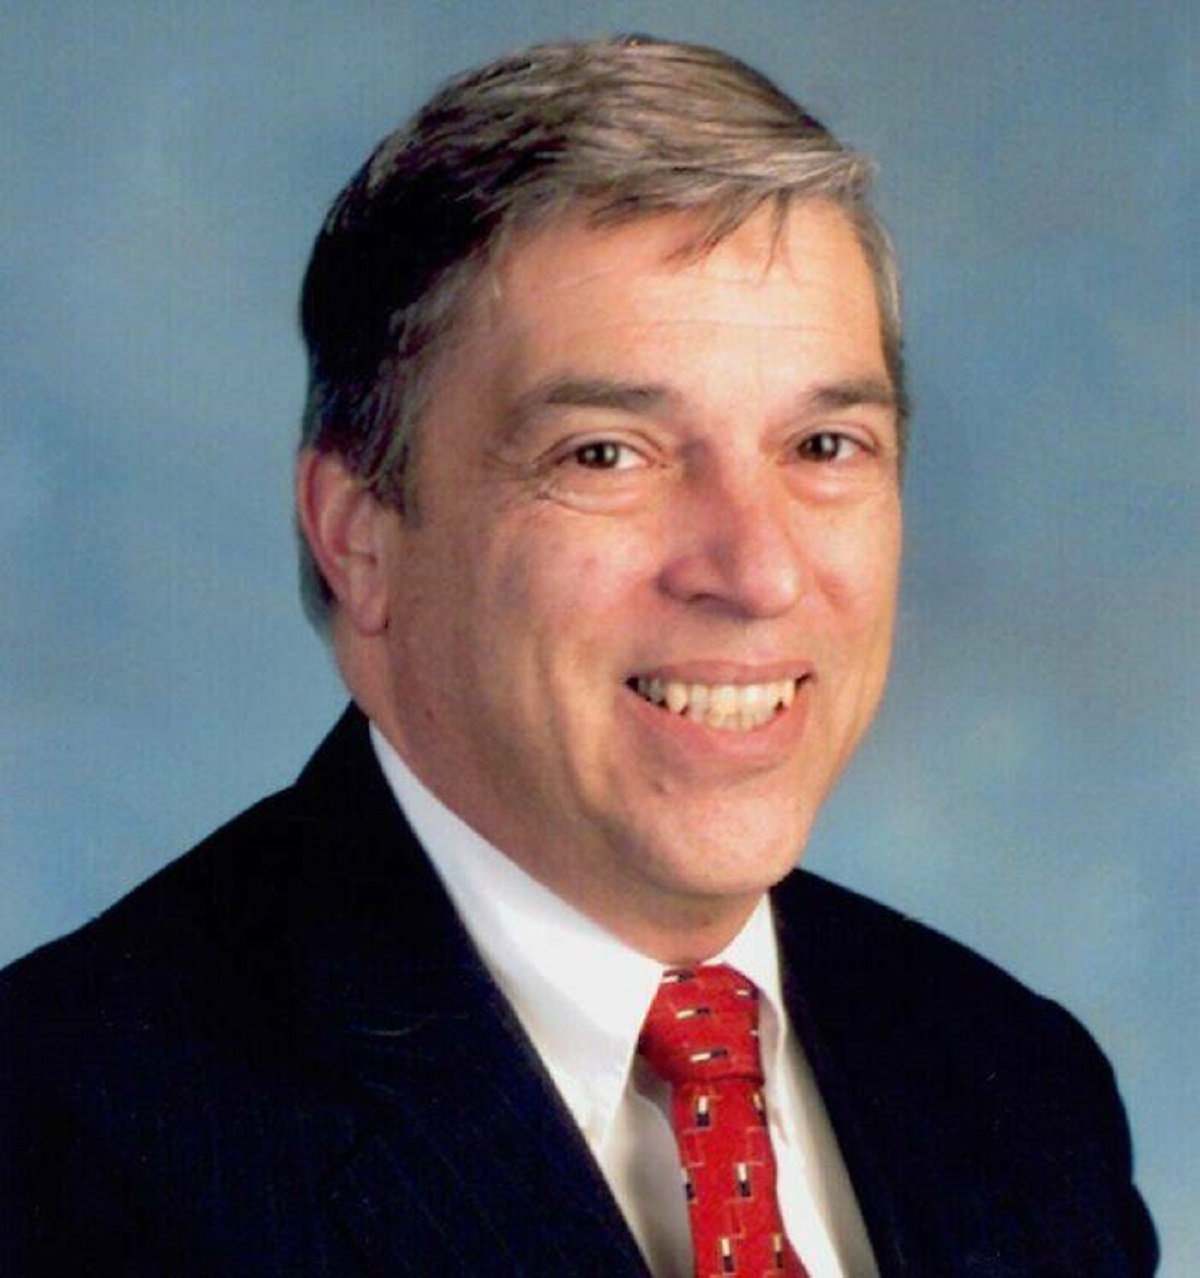 "This Is FBI Agent Robert Hanssen"

"He was tasked to find a mole within the FBI after the FBI's moles in the KGB were caught. Robert Hanssen was the mole and had been working with the KGB since 1979."